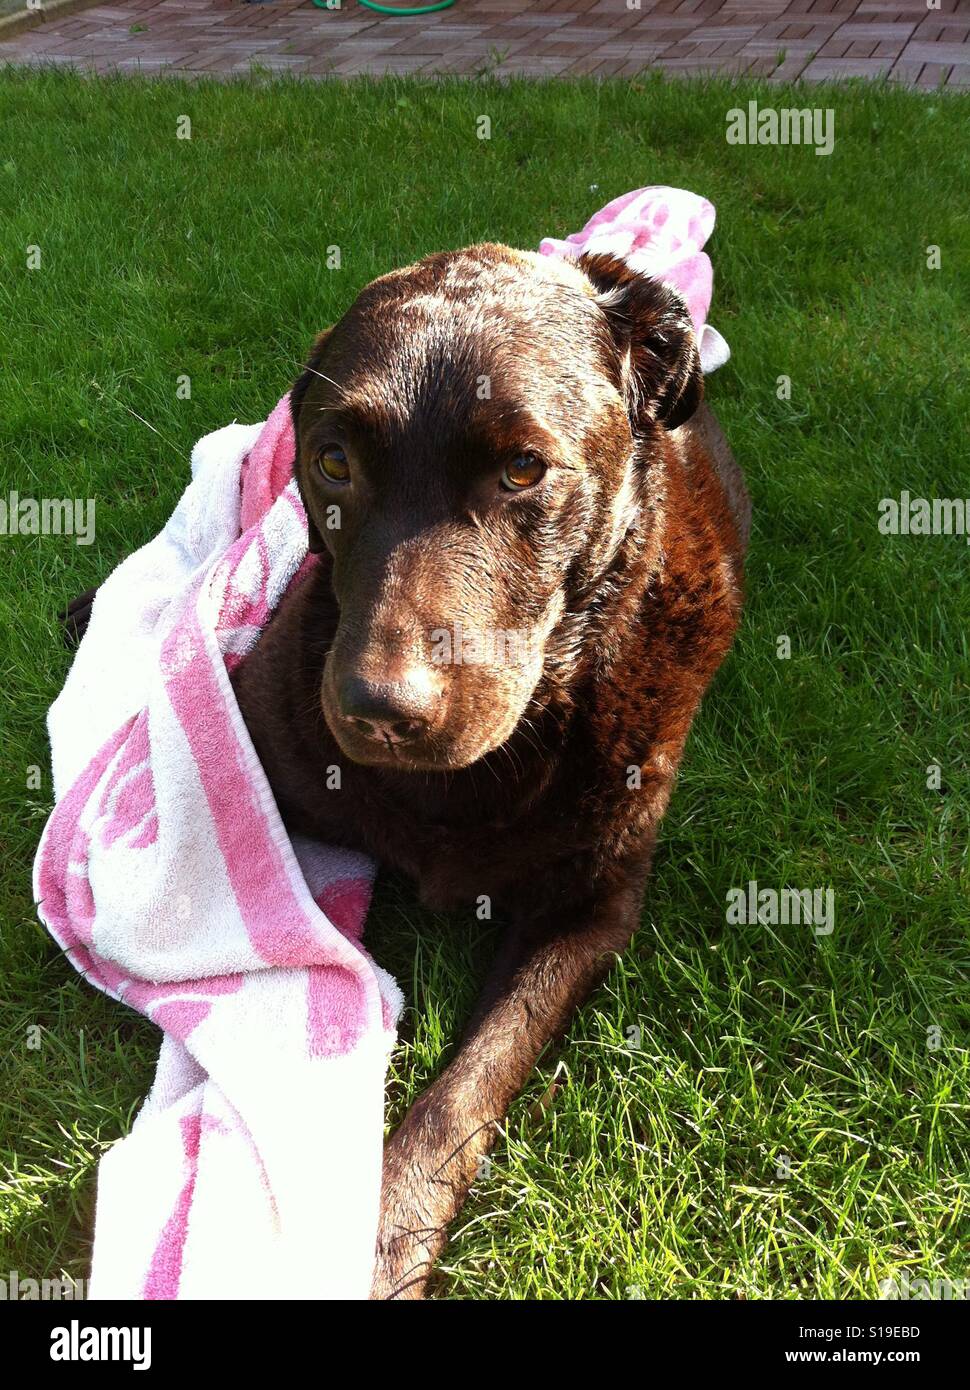 Our brown Labrador after playing with a towel Stock Photo